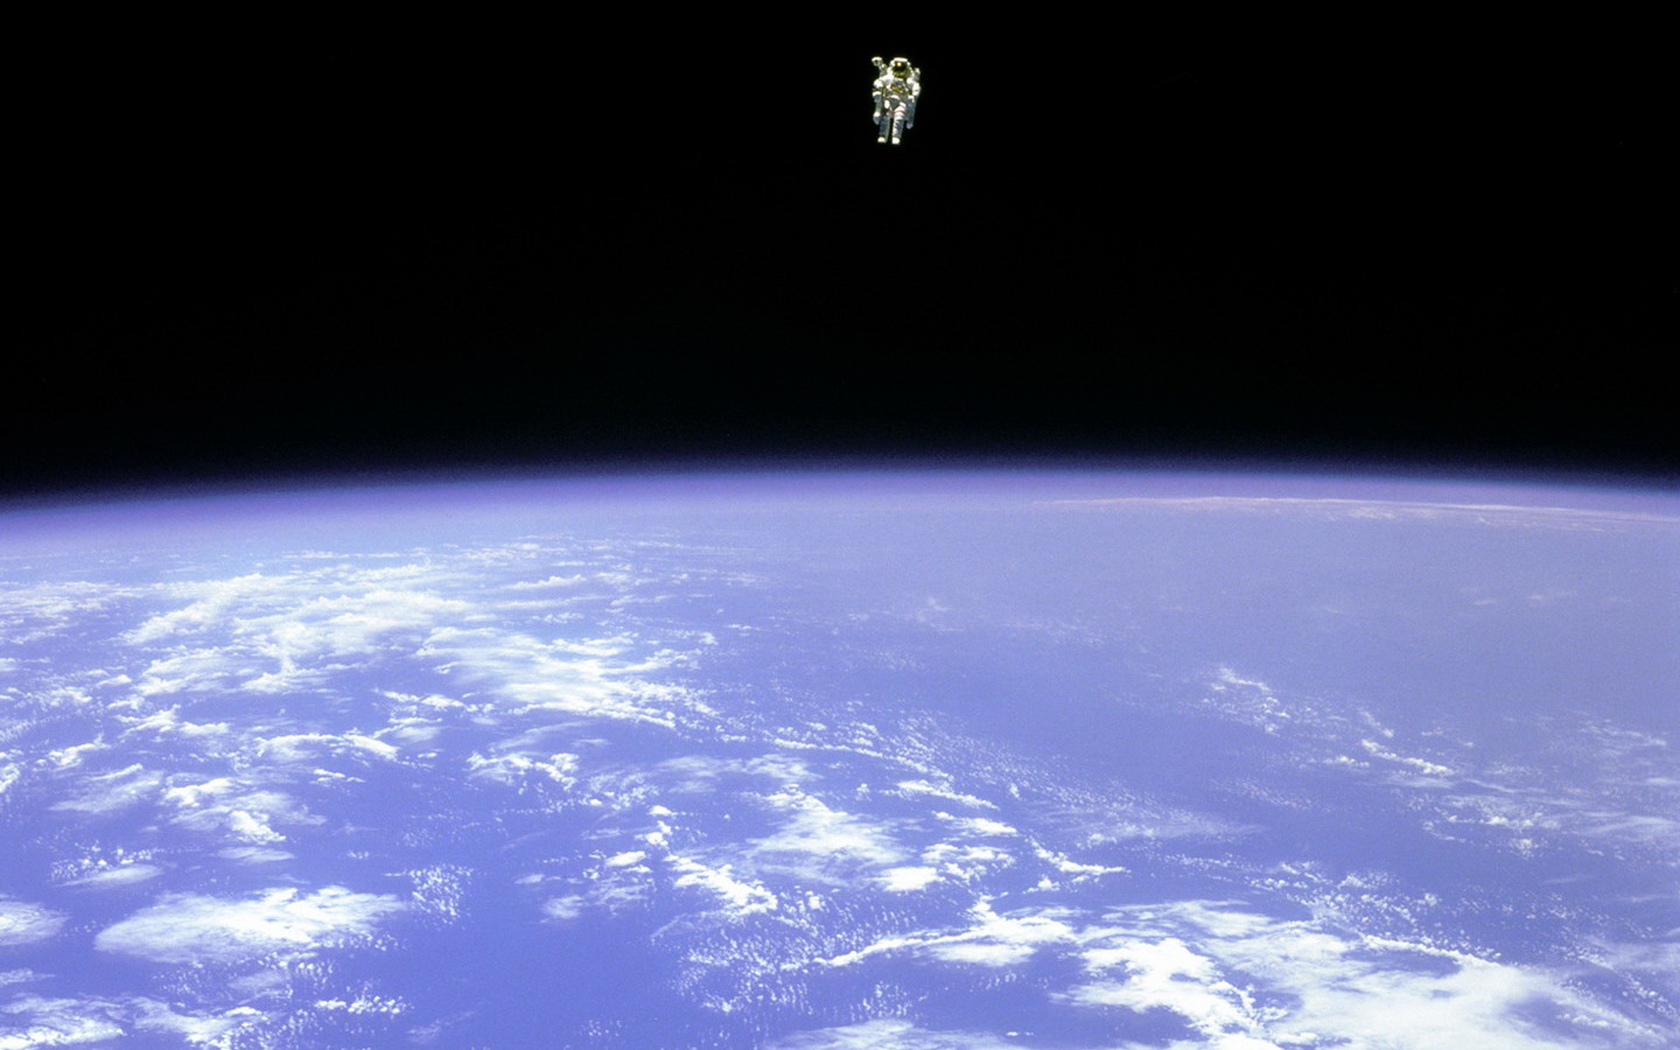 Astronaut viewing Earth from space